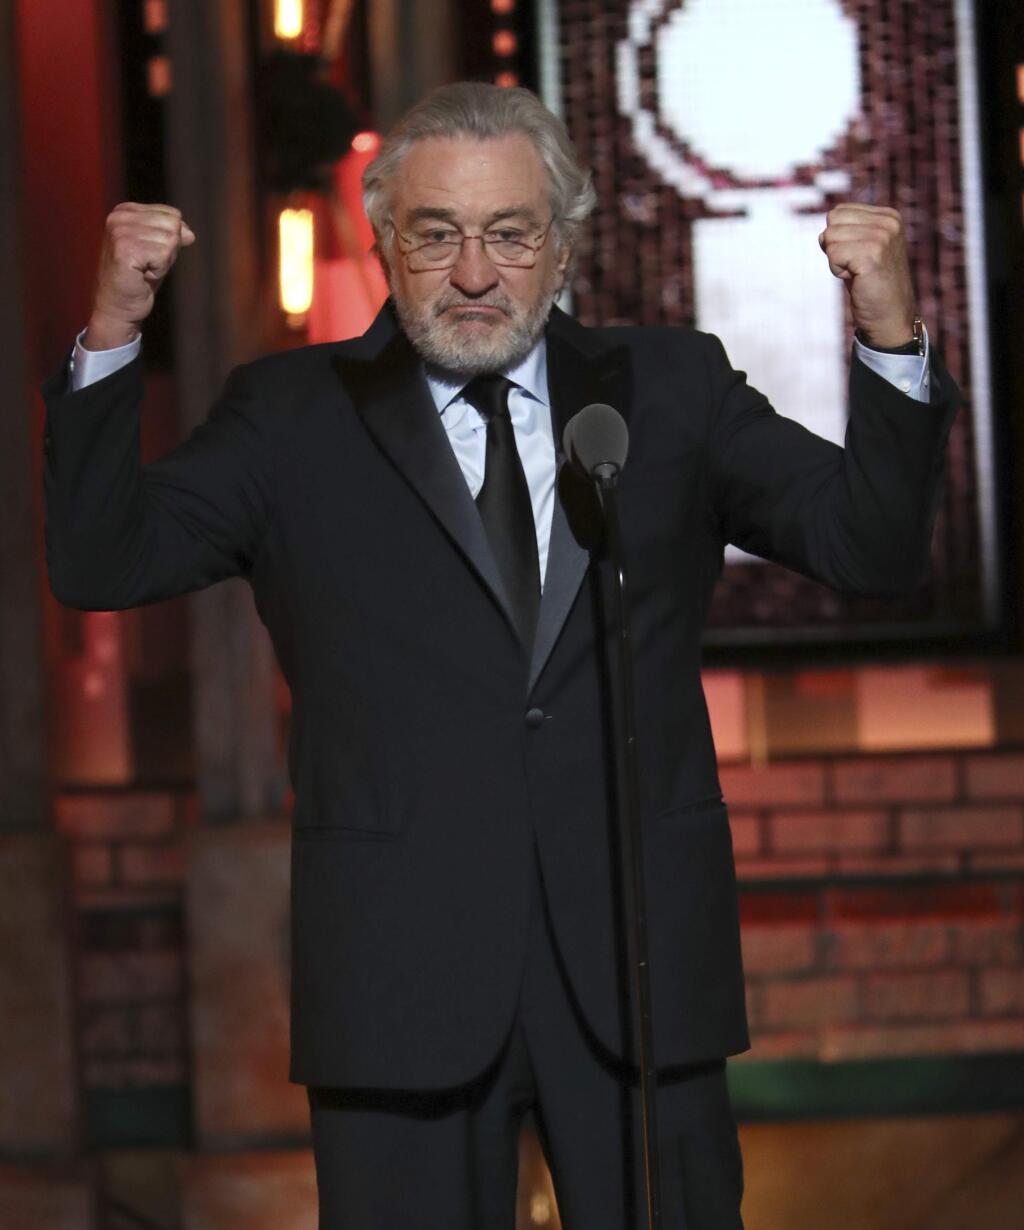 Robert De Niro gestures while introducing a performance by Bruce Springsteen at the 72nd annual Tony Awards at Radio City Music Hall on Sunday, June 10, 2018, in New York. (Photo by Michael Zorn/Invision/AP)